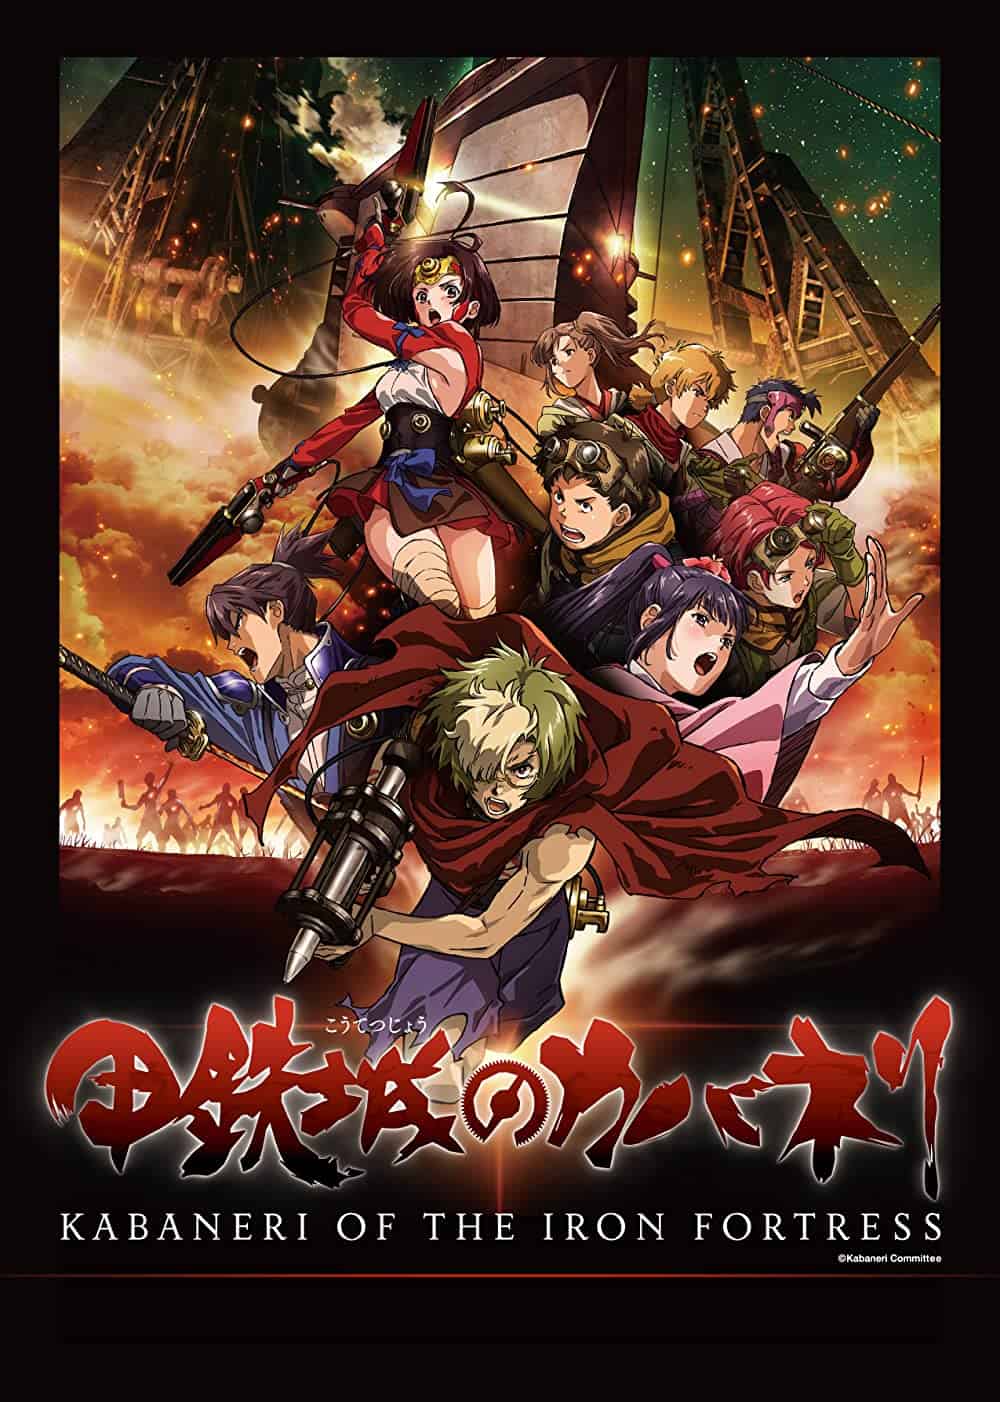 Kabaneri of the Iron Fortress hd poster